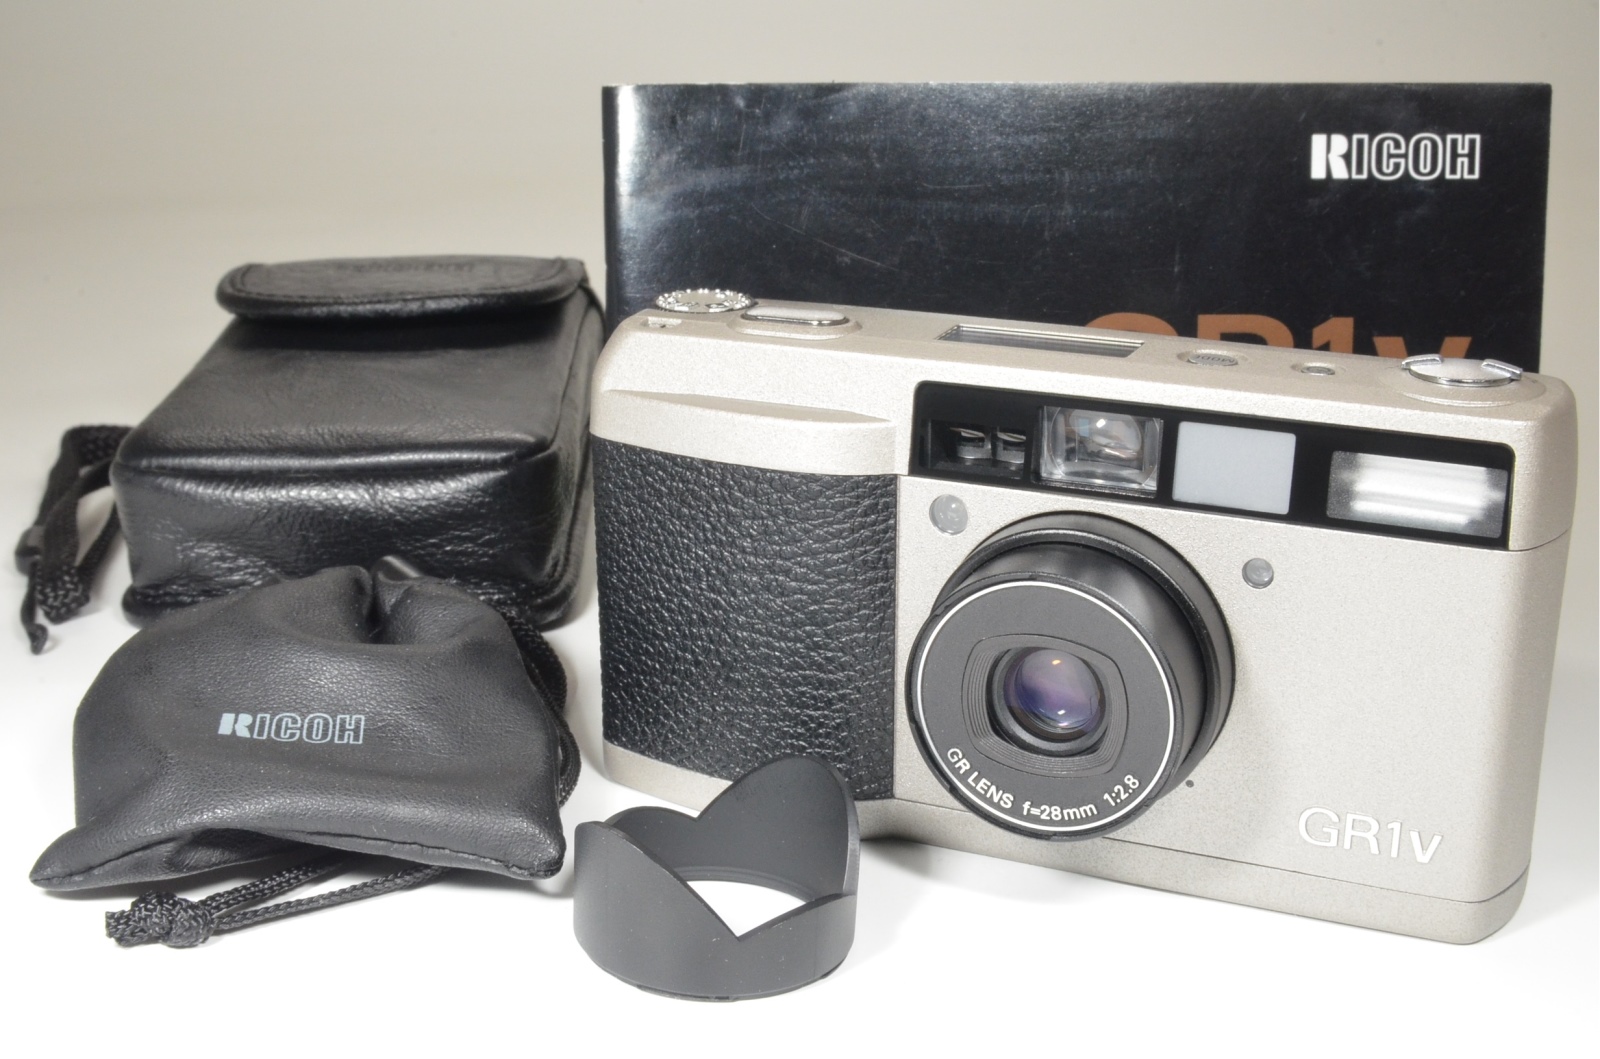 RICOH GR1v Date Silver 28mm f2.8 Point & Shoot 35mm Film